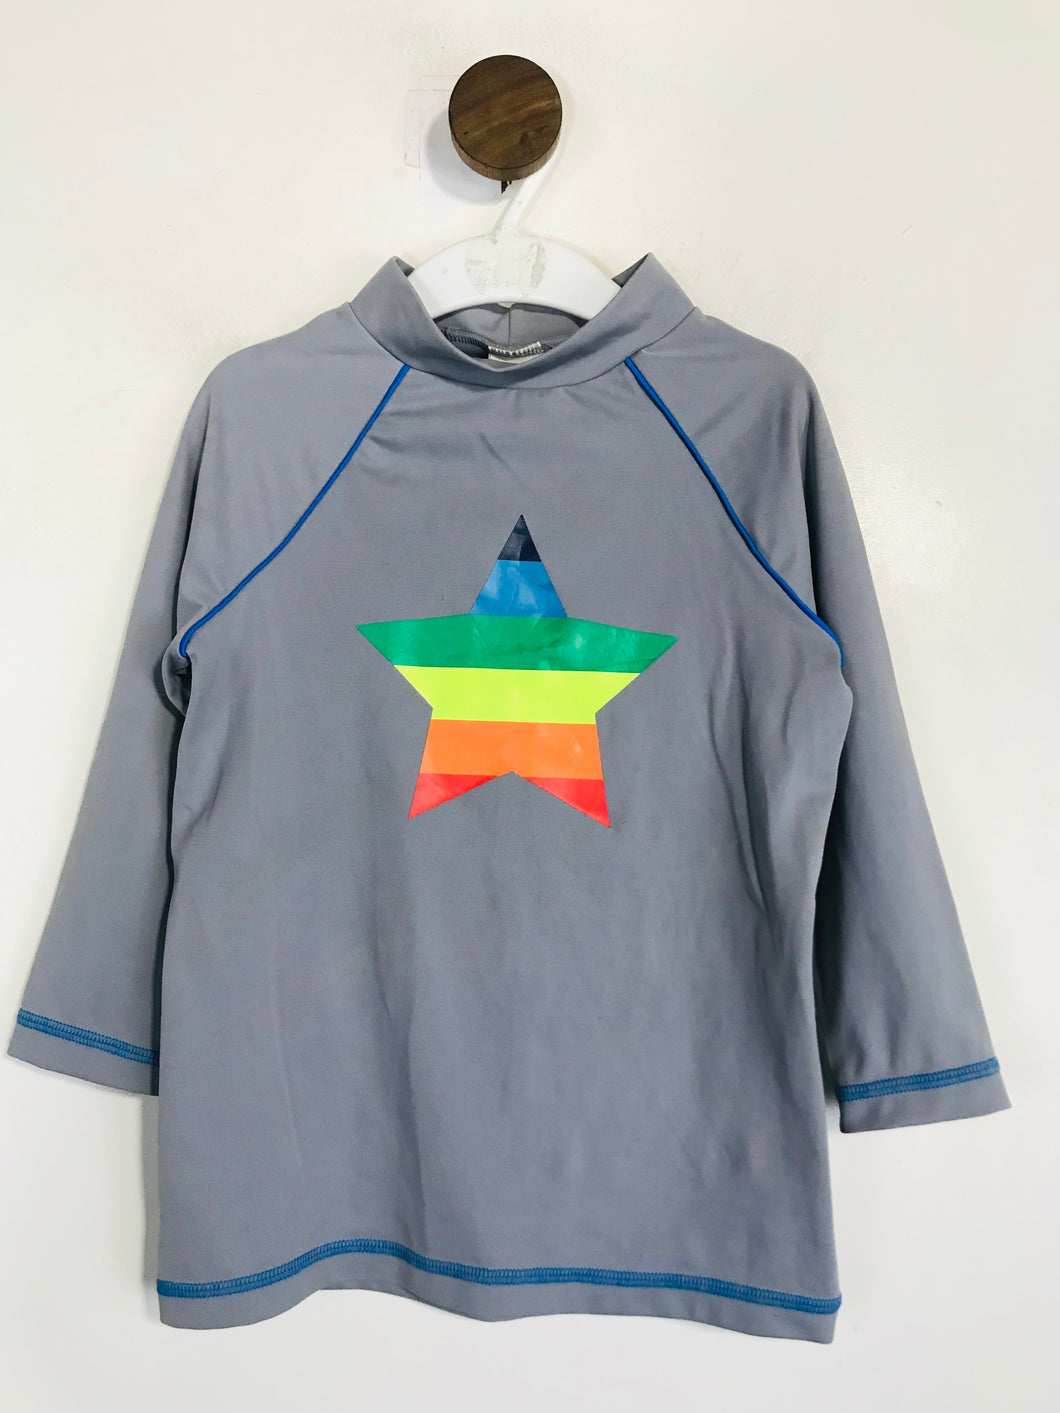 Boden Kid's Long Sleeve Swimming Sports Top | 6-7 Years | Grey